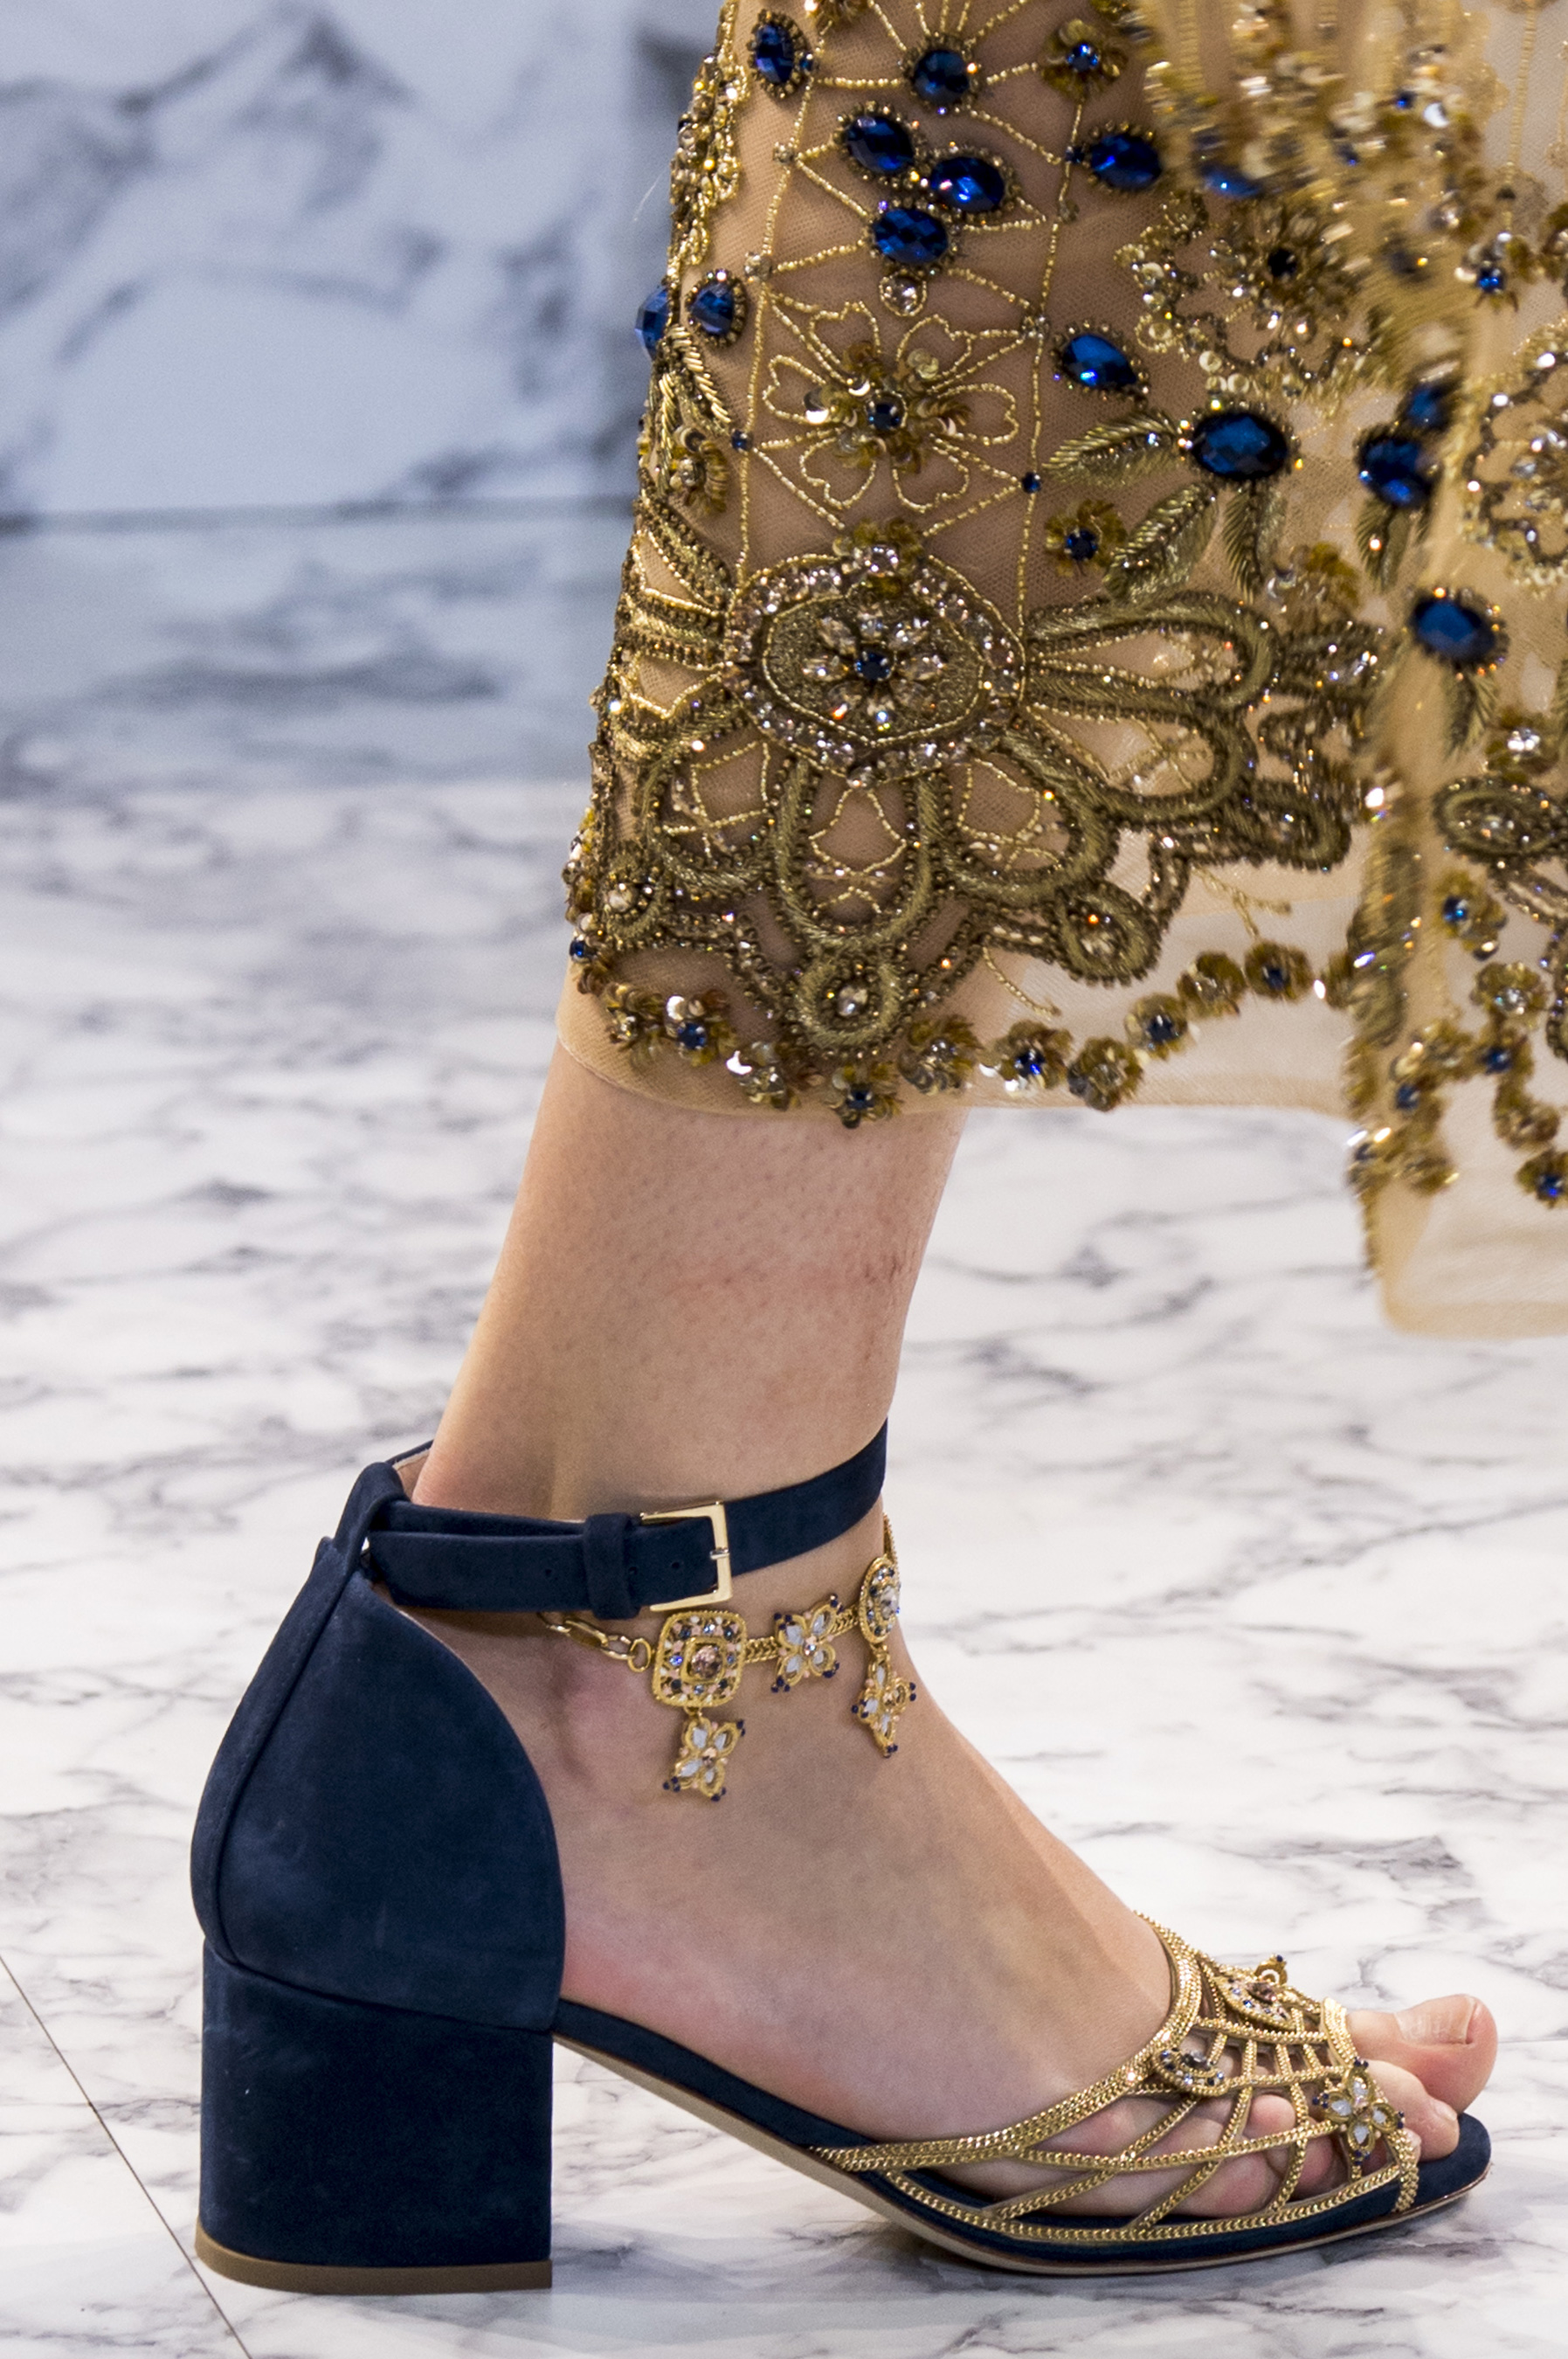 Elie Saab Spring 17Couture | Shoes fashion photography, Fashion shoes ...